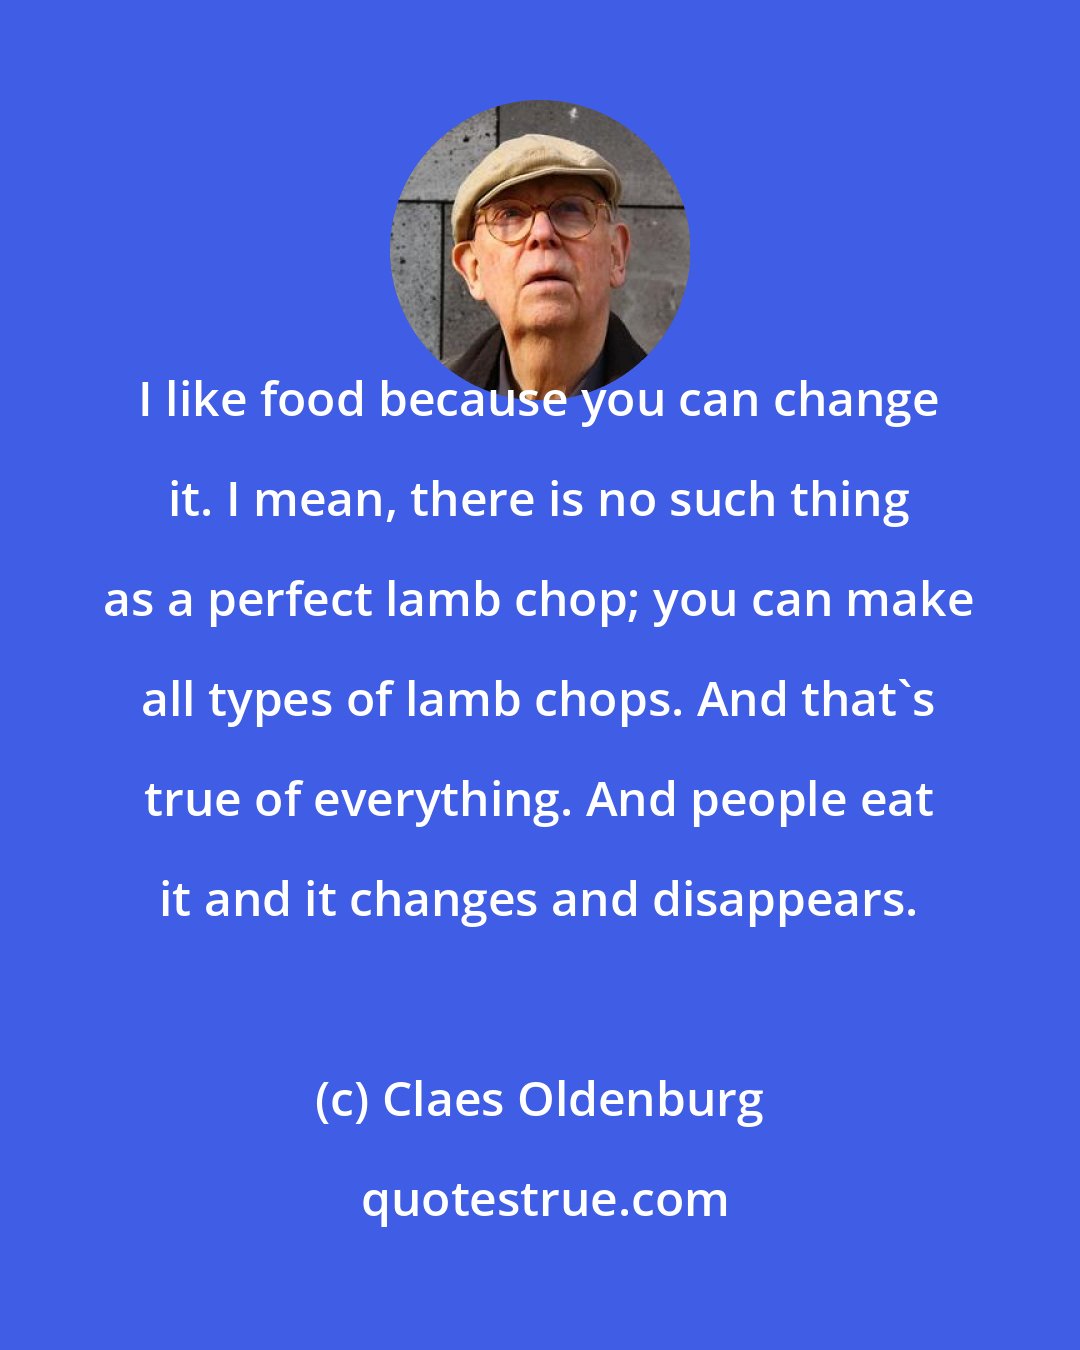 Claes Oldenburg: I like food because you can change it. I mean, there is no such thing as a perfect lamb chop; you can make all types of lamb chops. And that's true of everything. And people eat it and it changes and disappears.